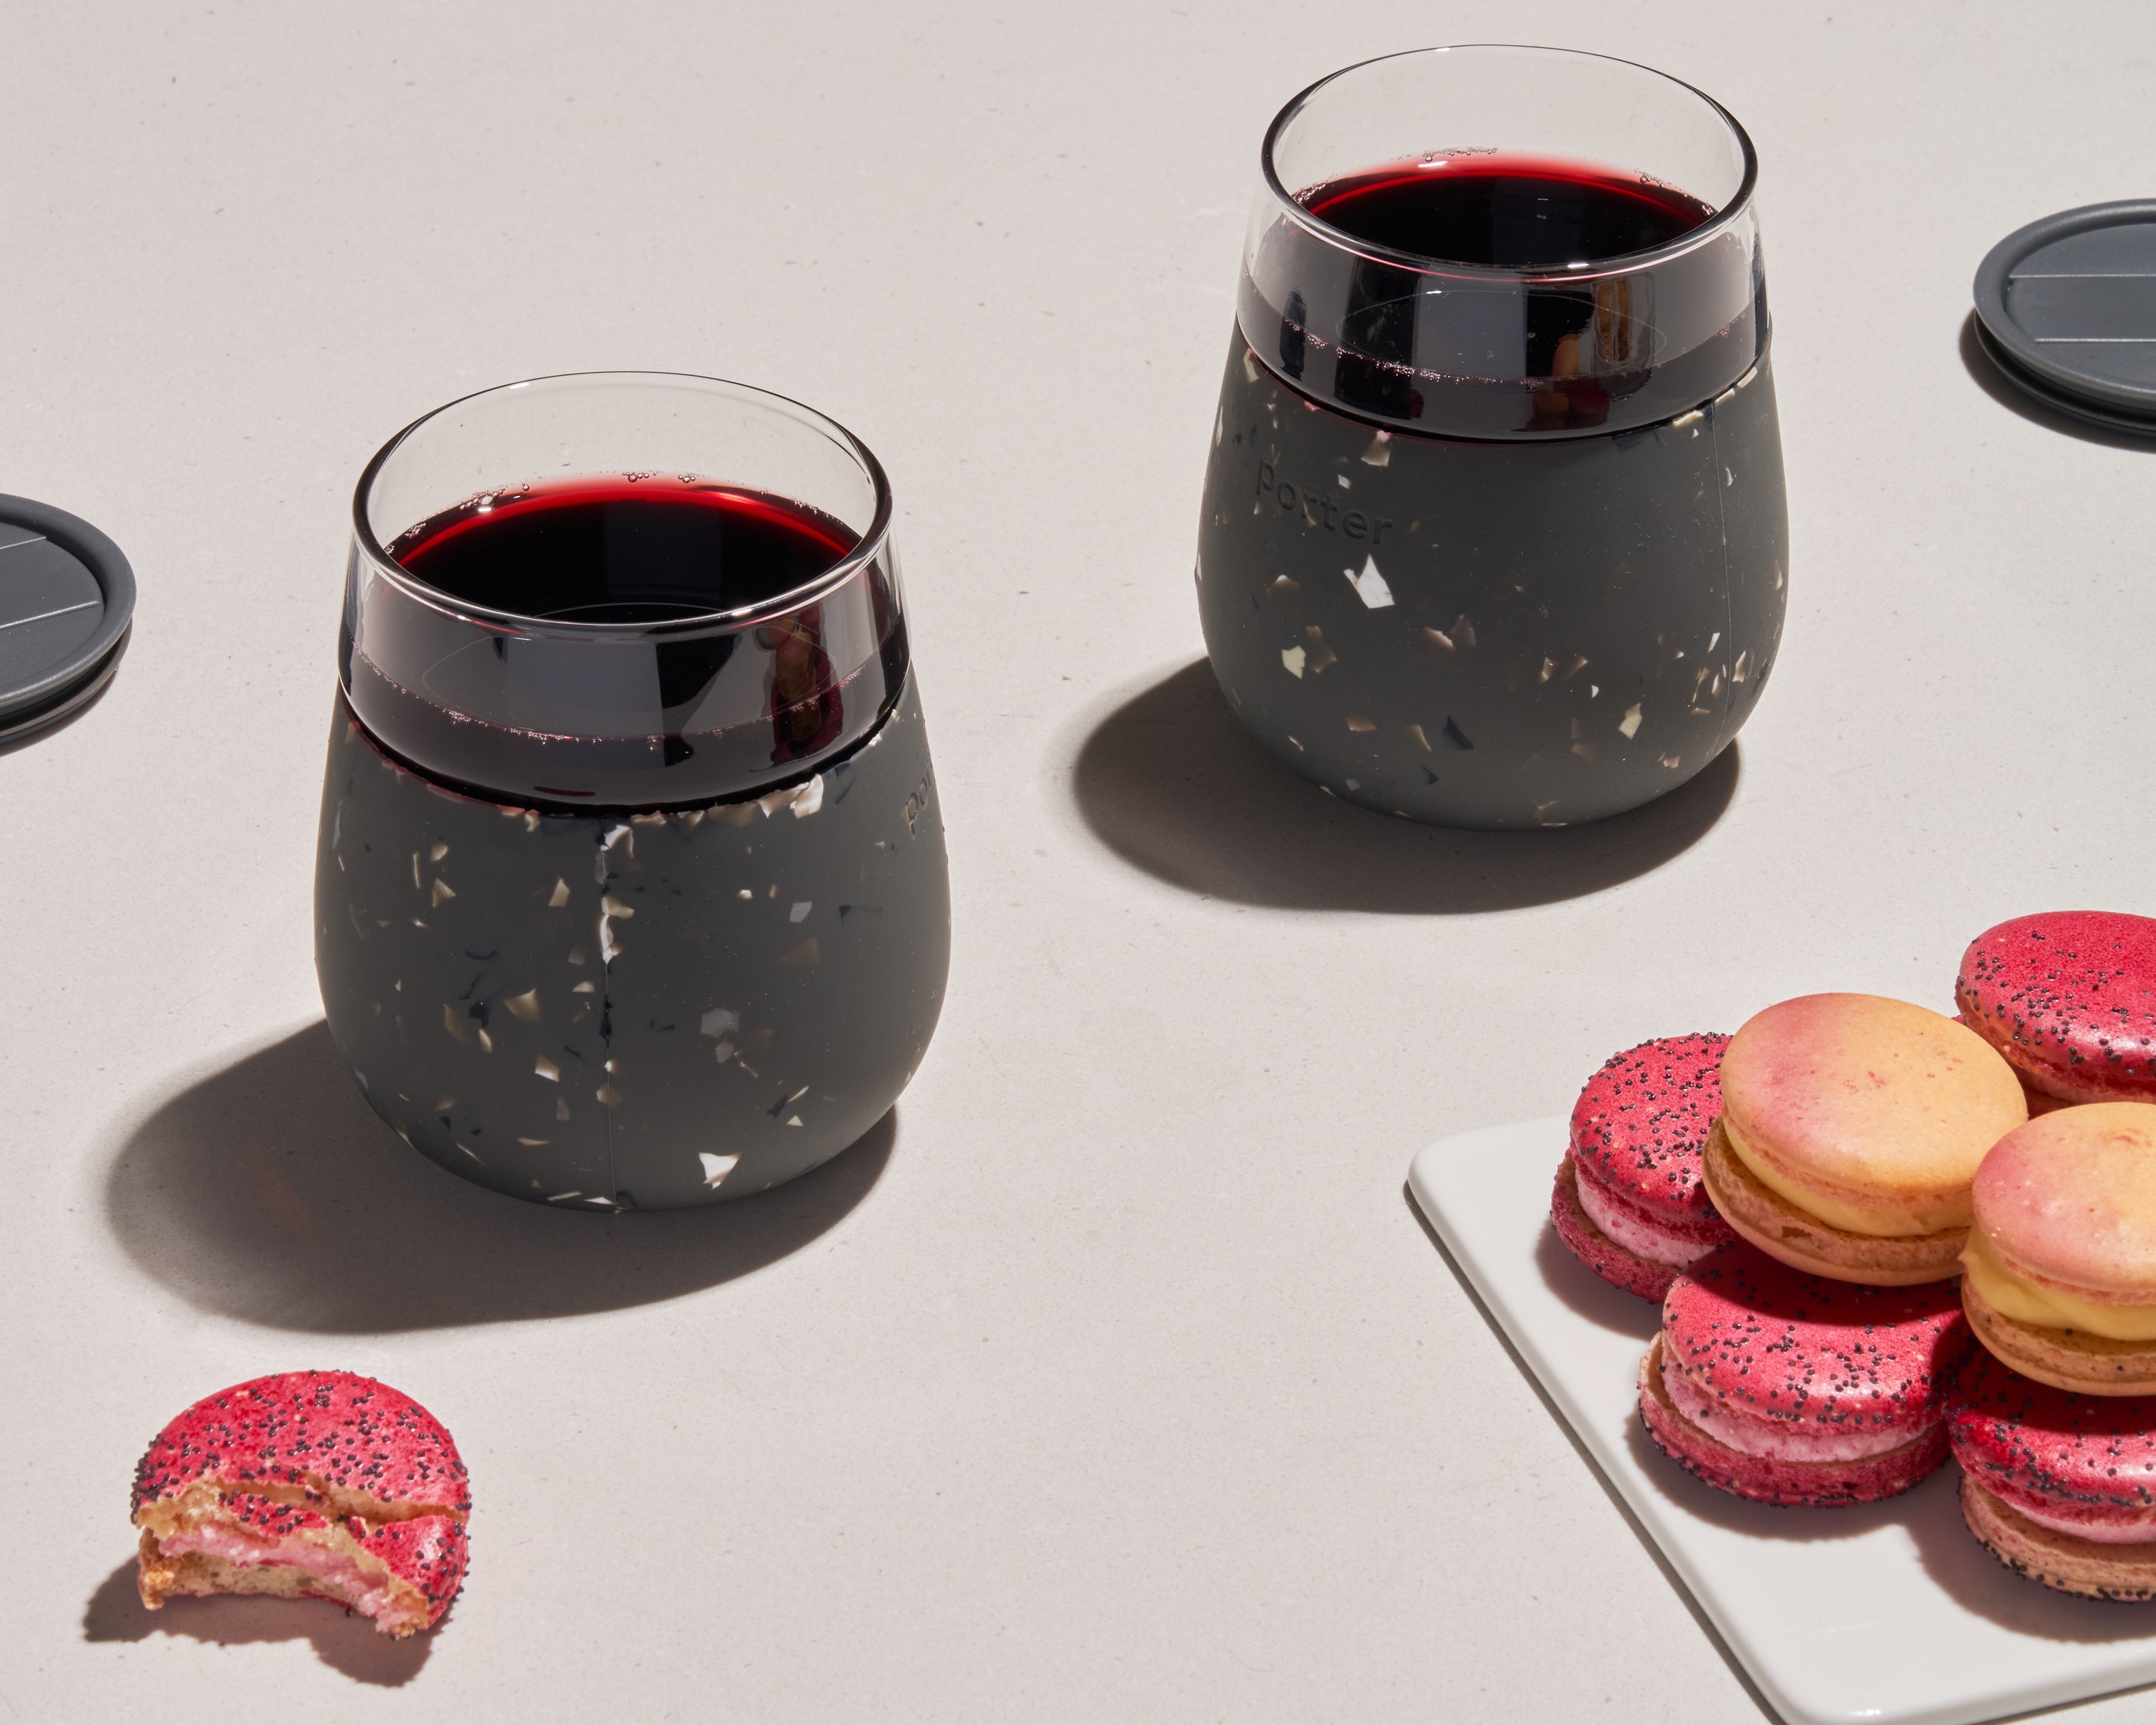 Charcoal Terrazzo Soft silicone wrap over clear glass — this infinitely reusable glass is great for wine, cocktails, & more on the go.